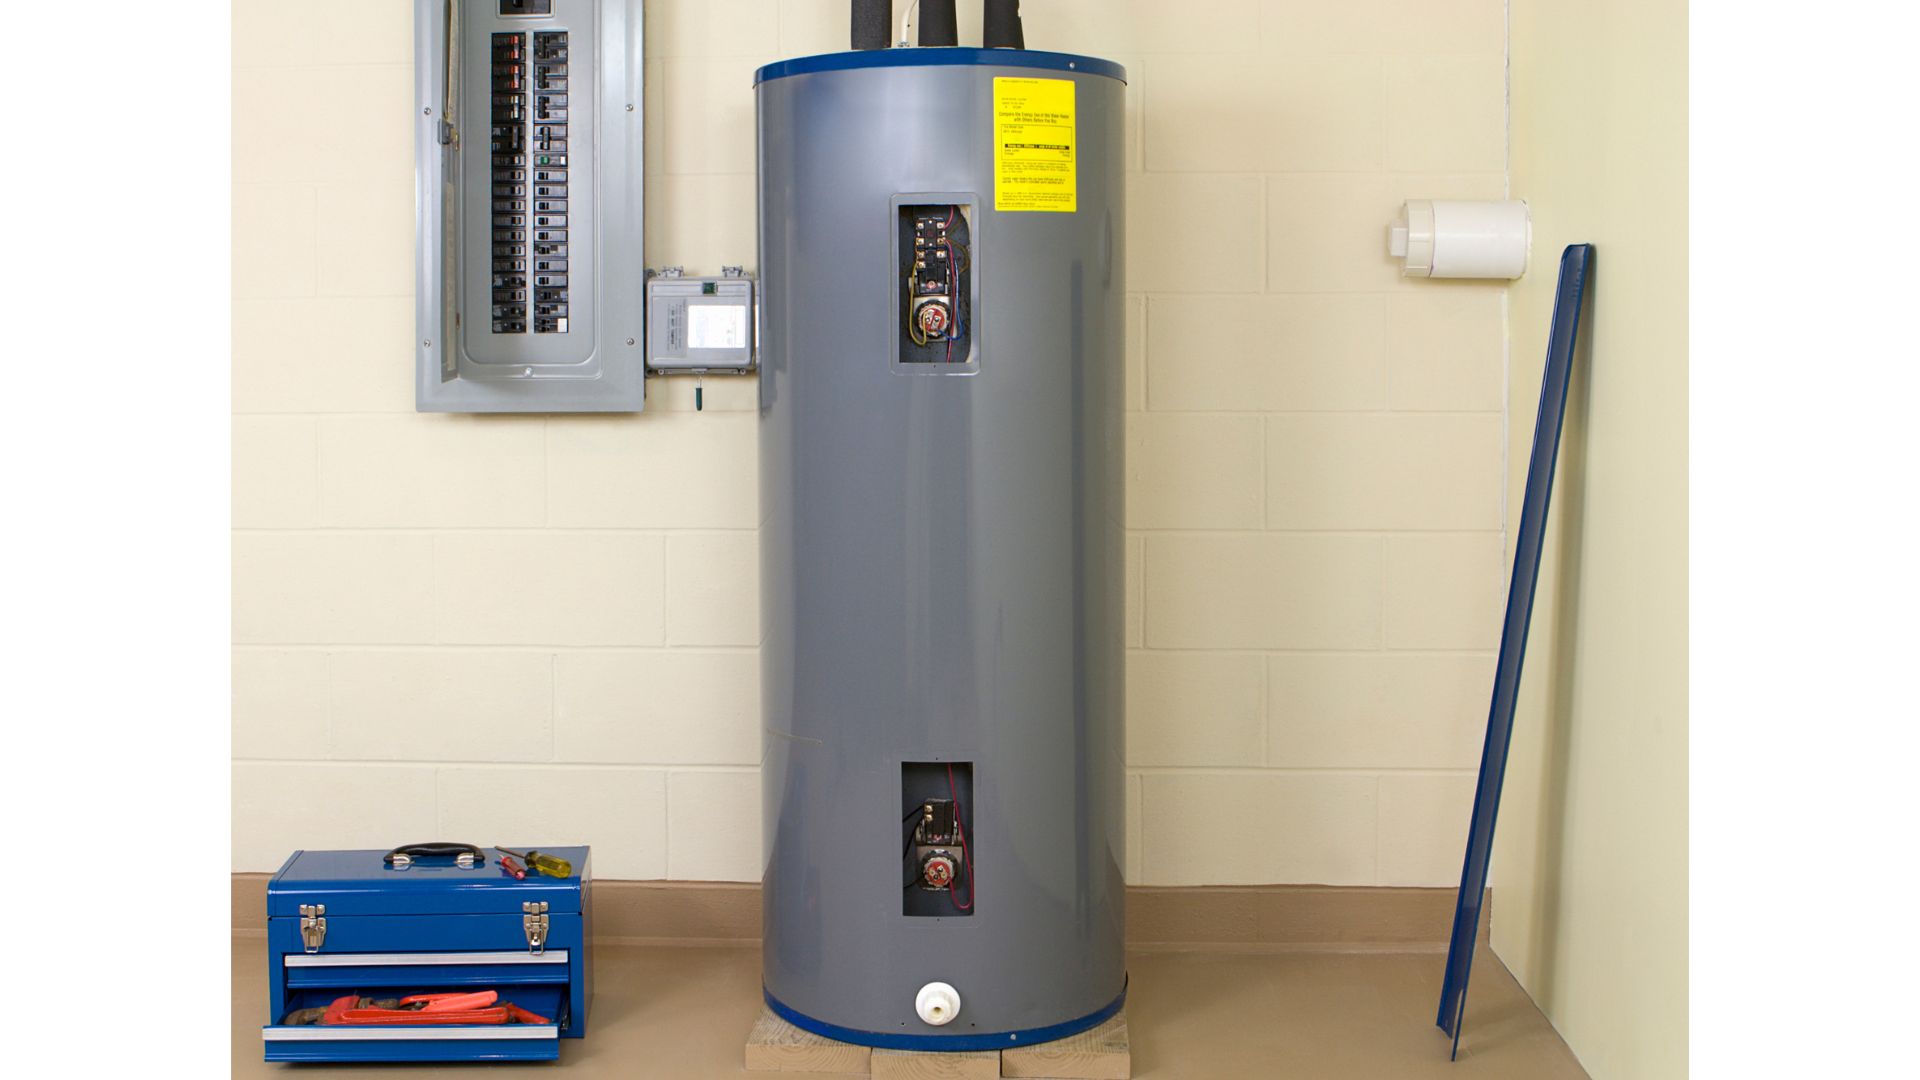 is a water heater 110 or 220